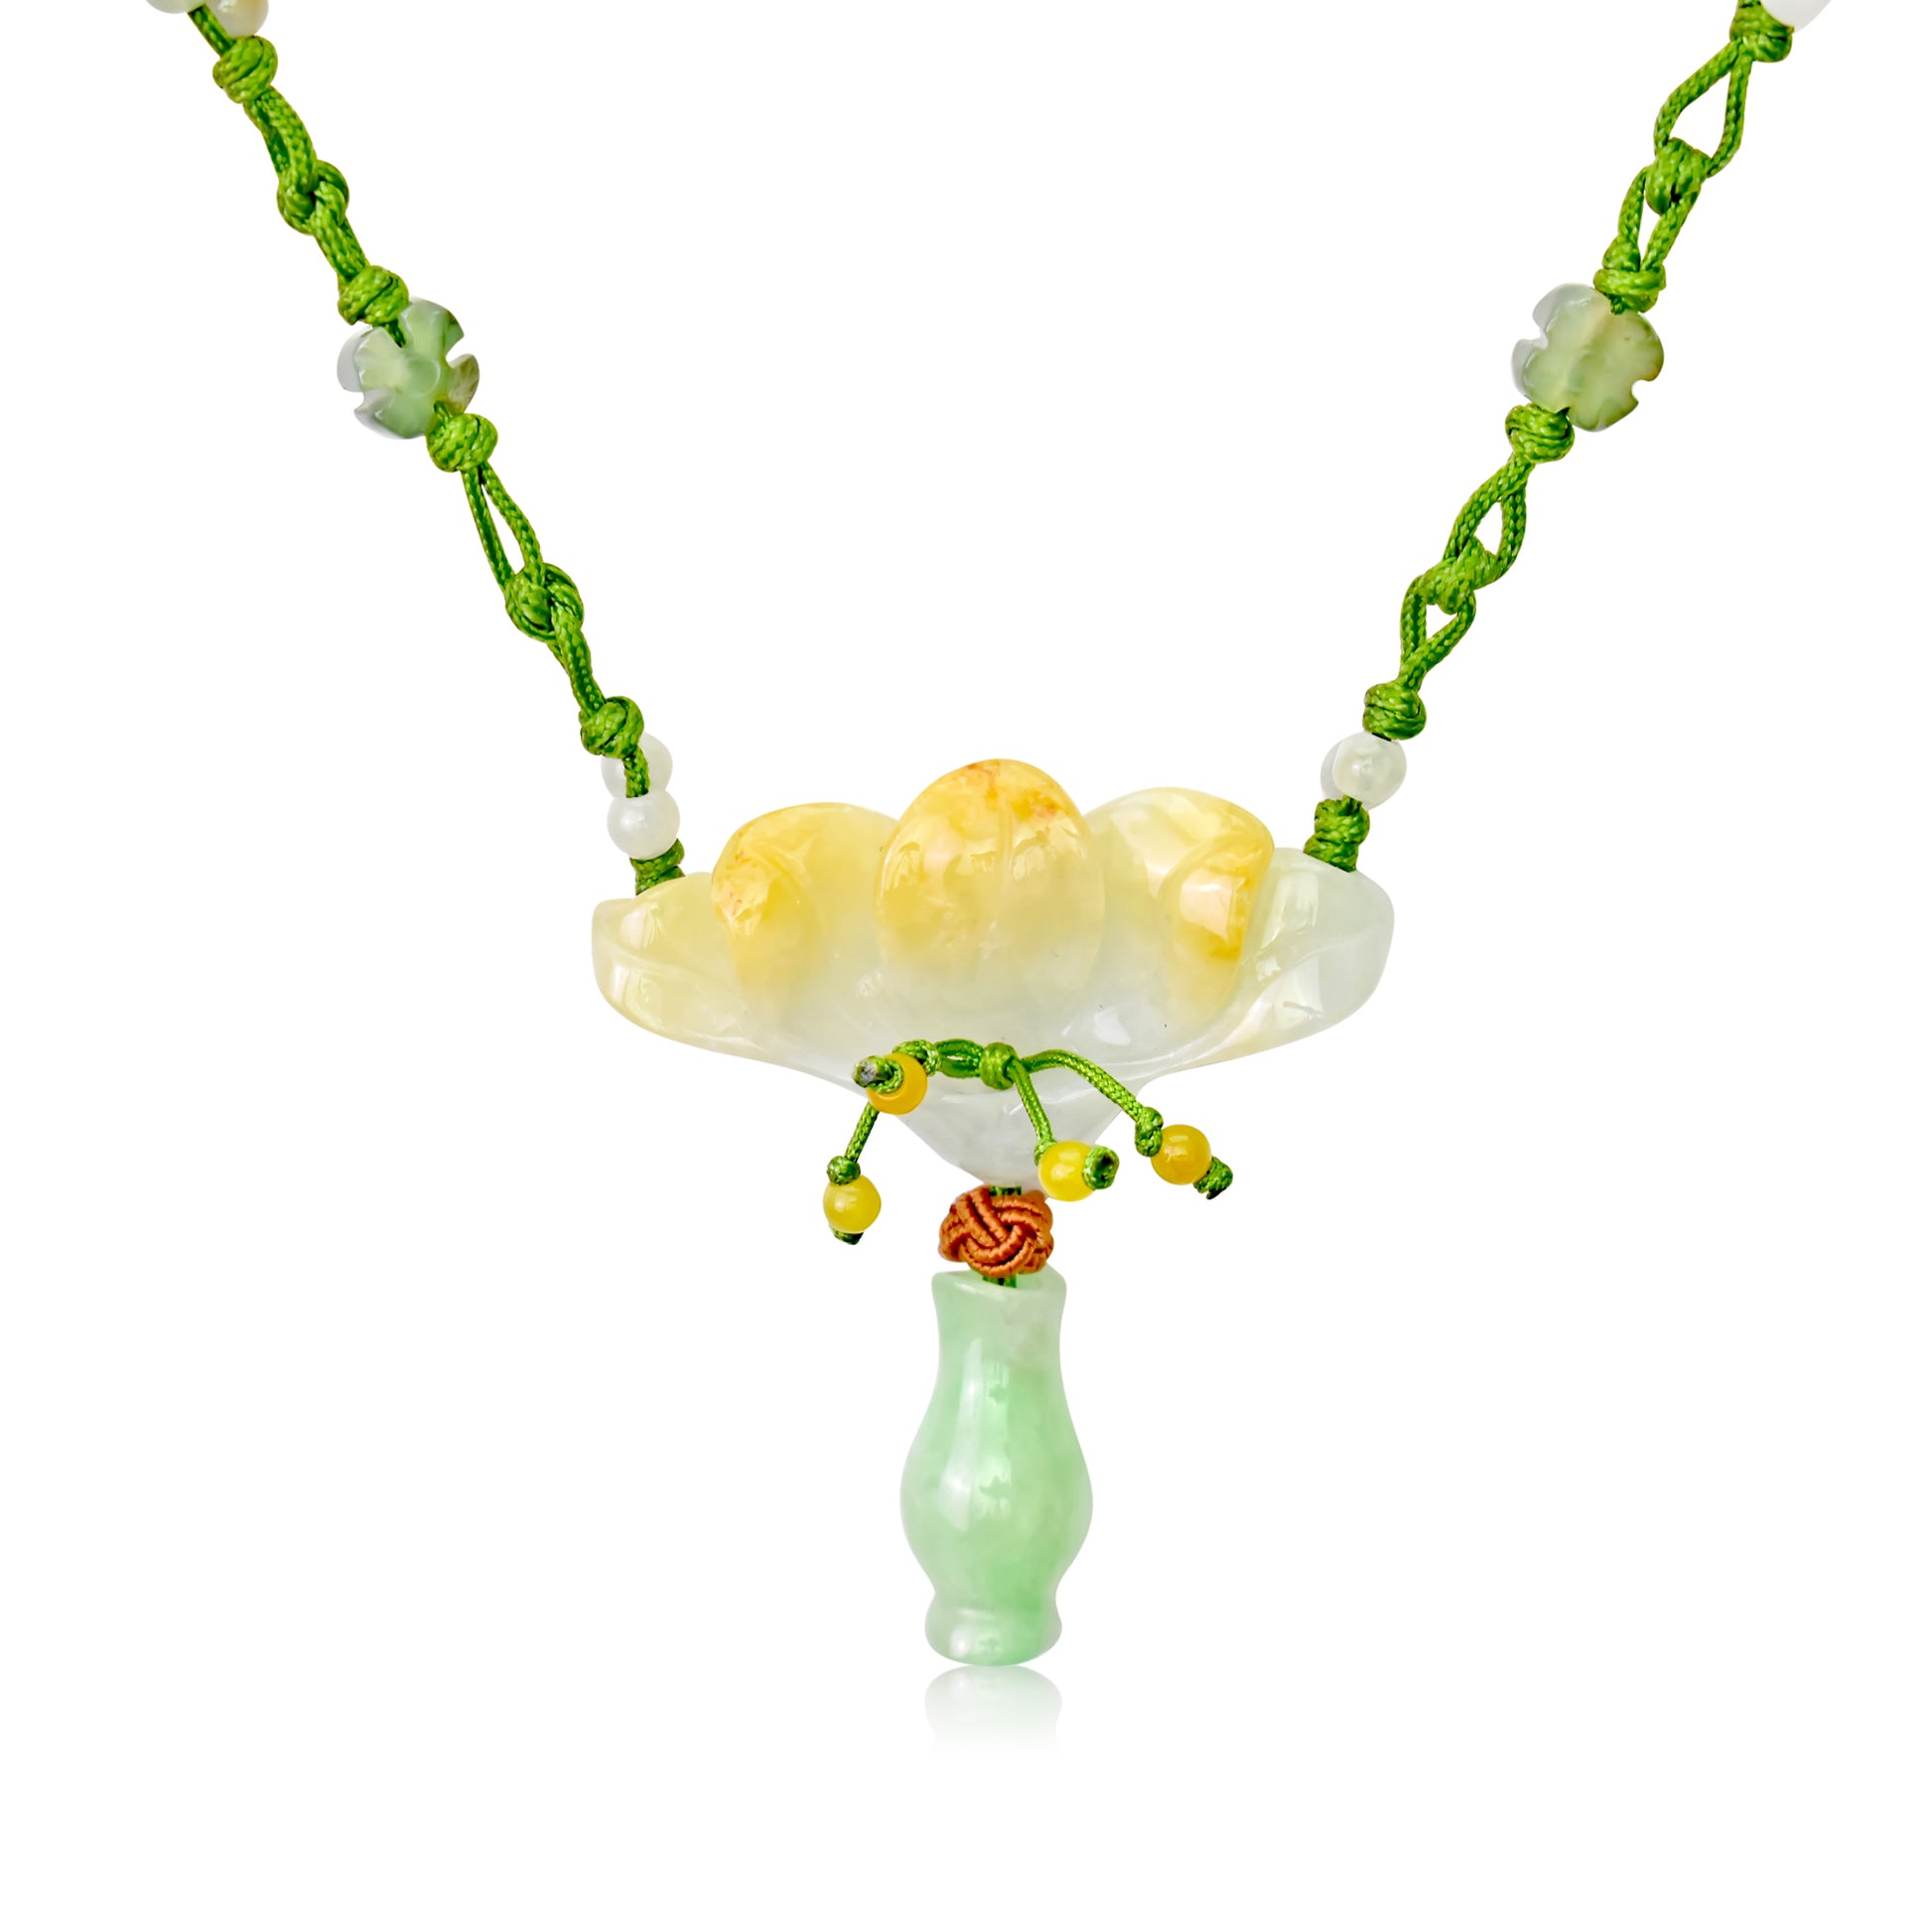 Make Your Wishes Come True with the Peacock Flower Jade Necklace made with Lime Cord